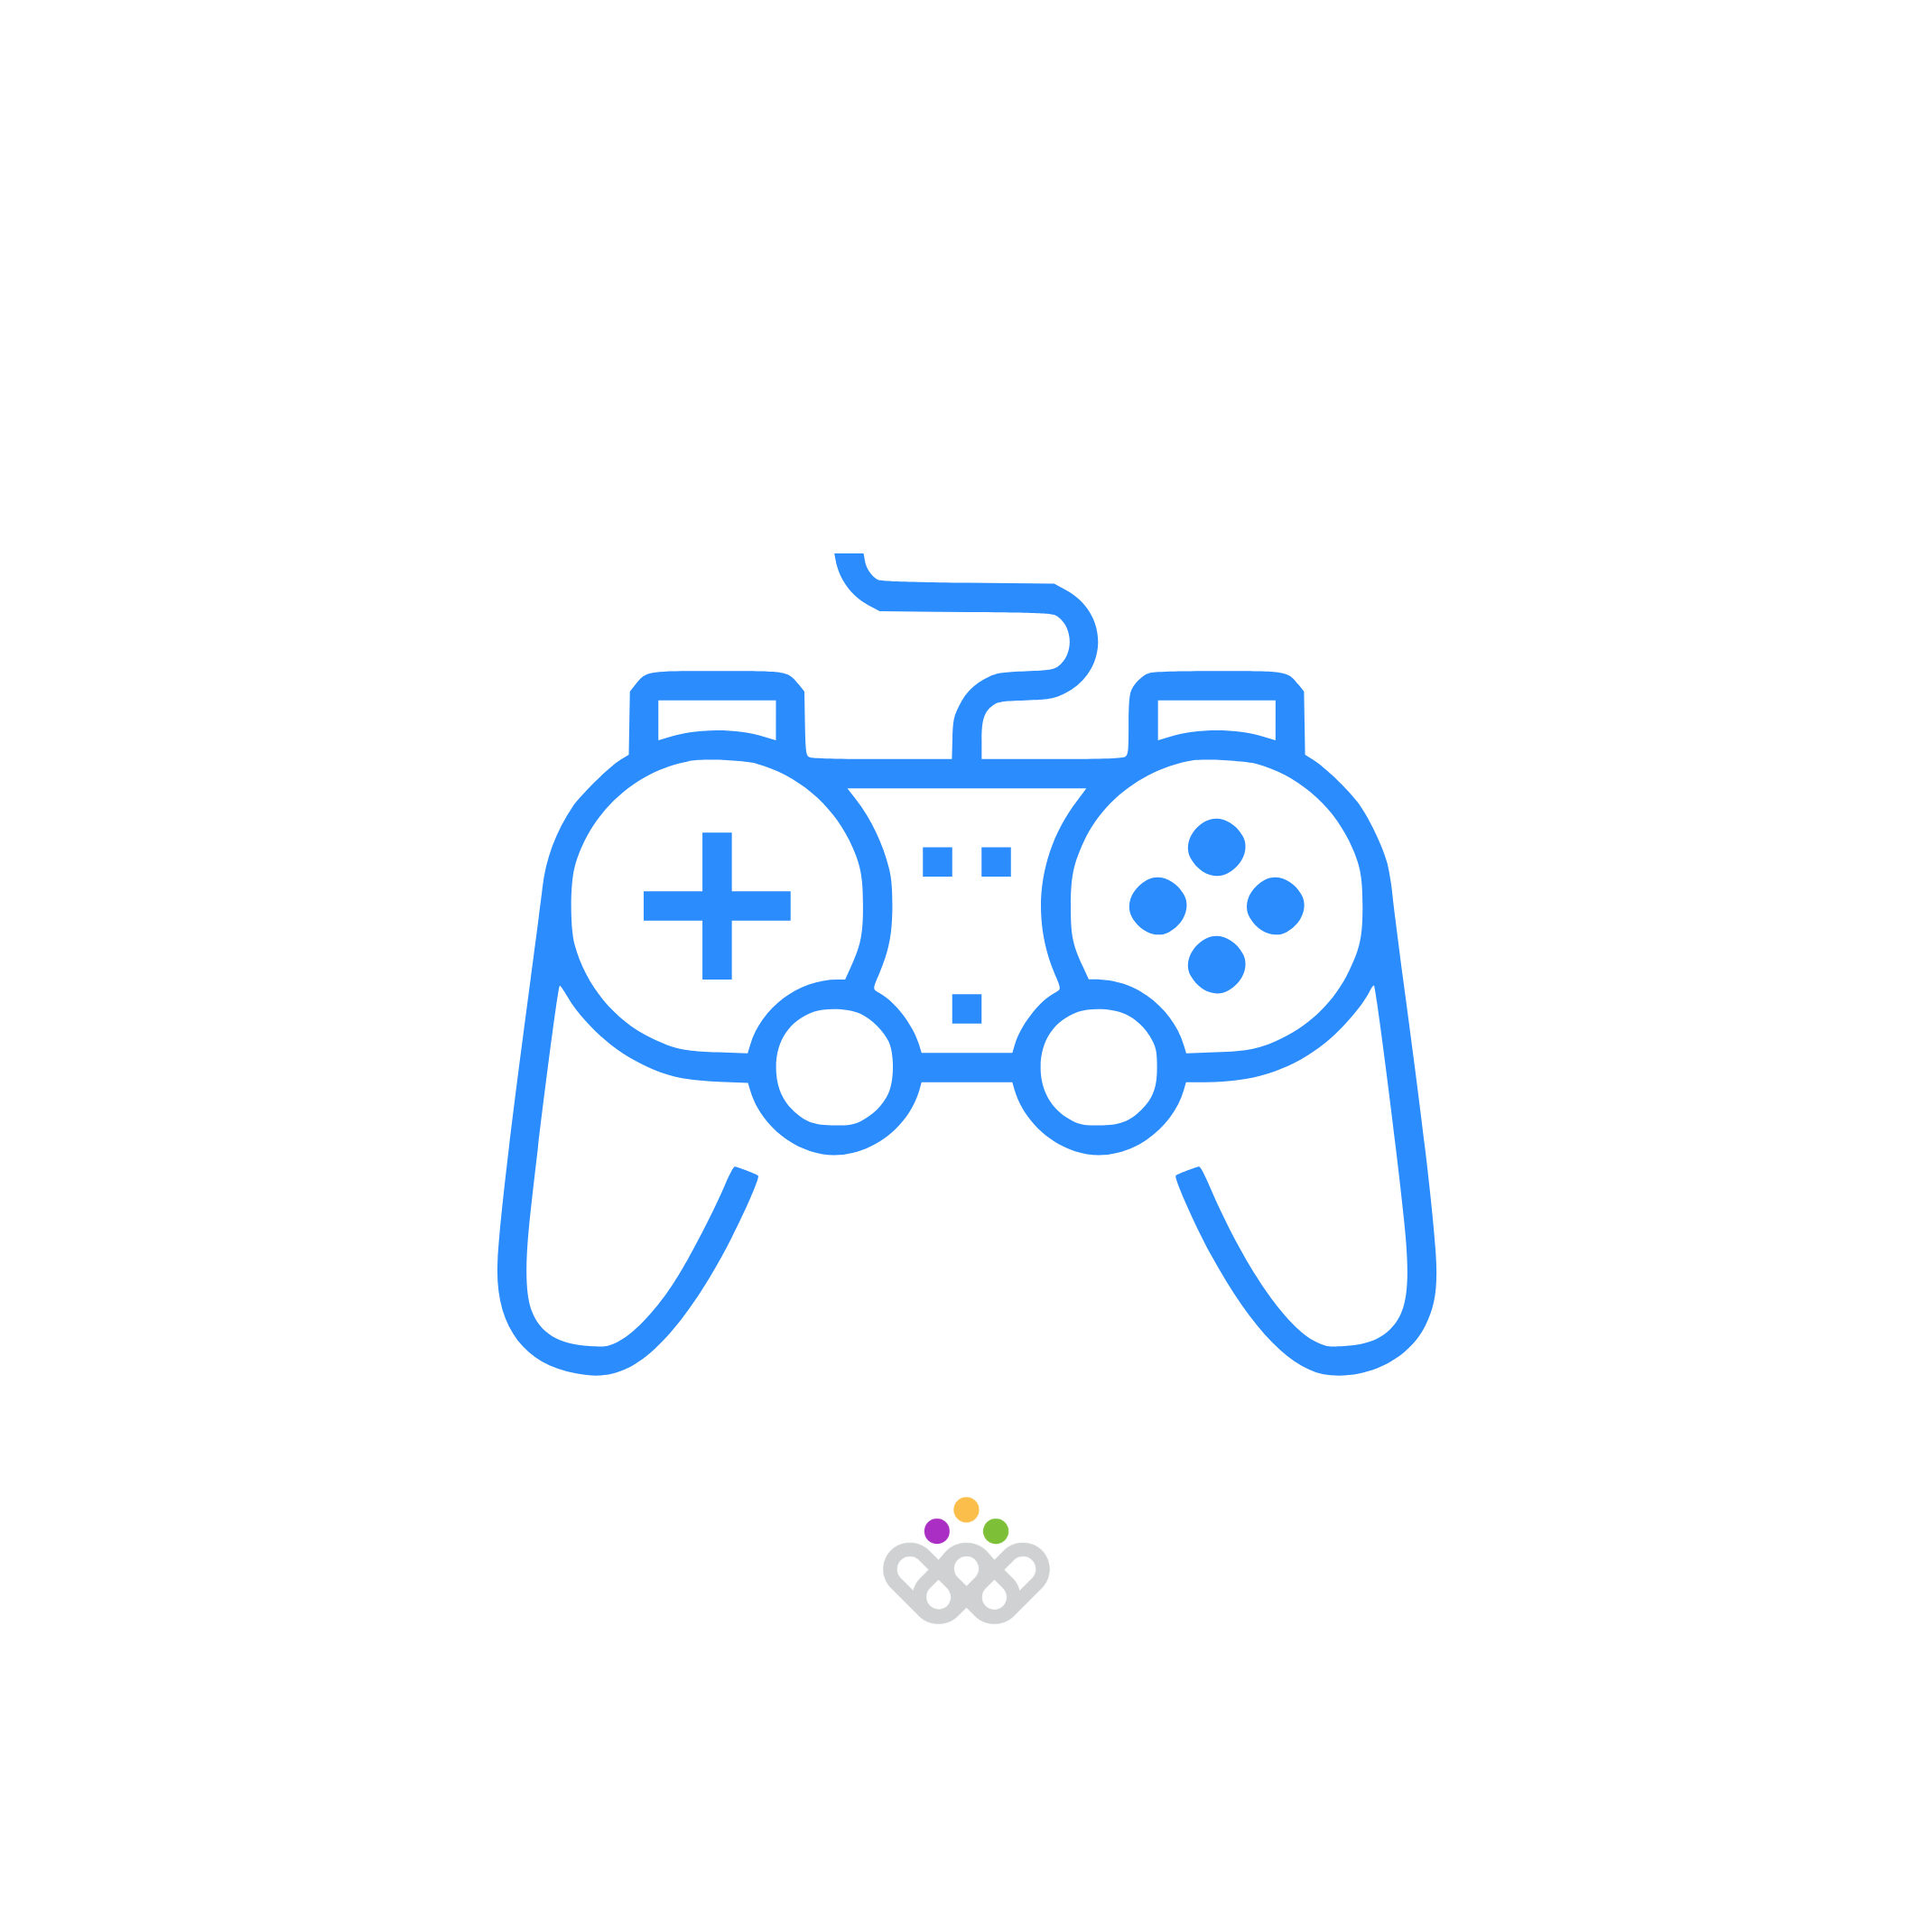 Play the field: Strategies to bring gamification in the workplace